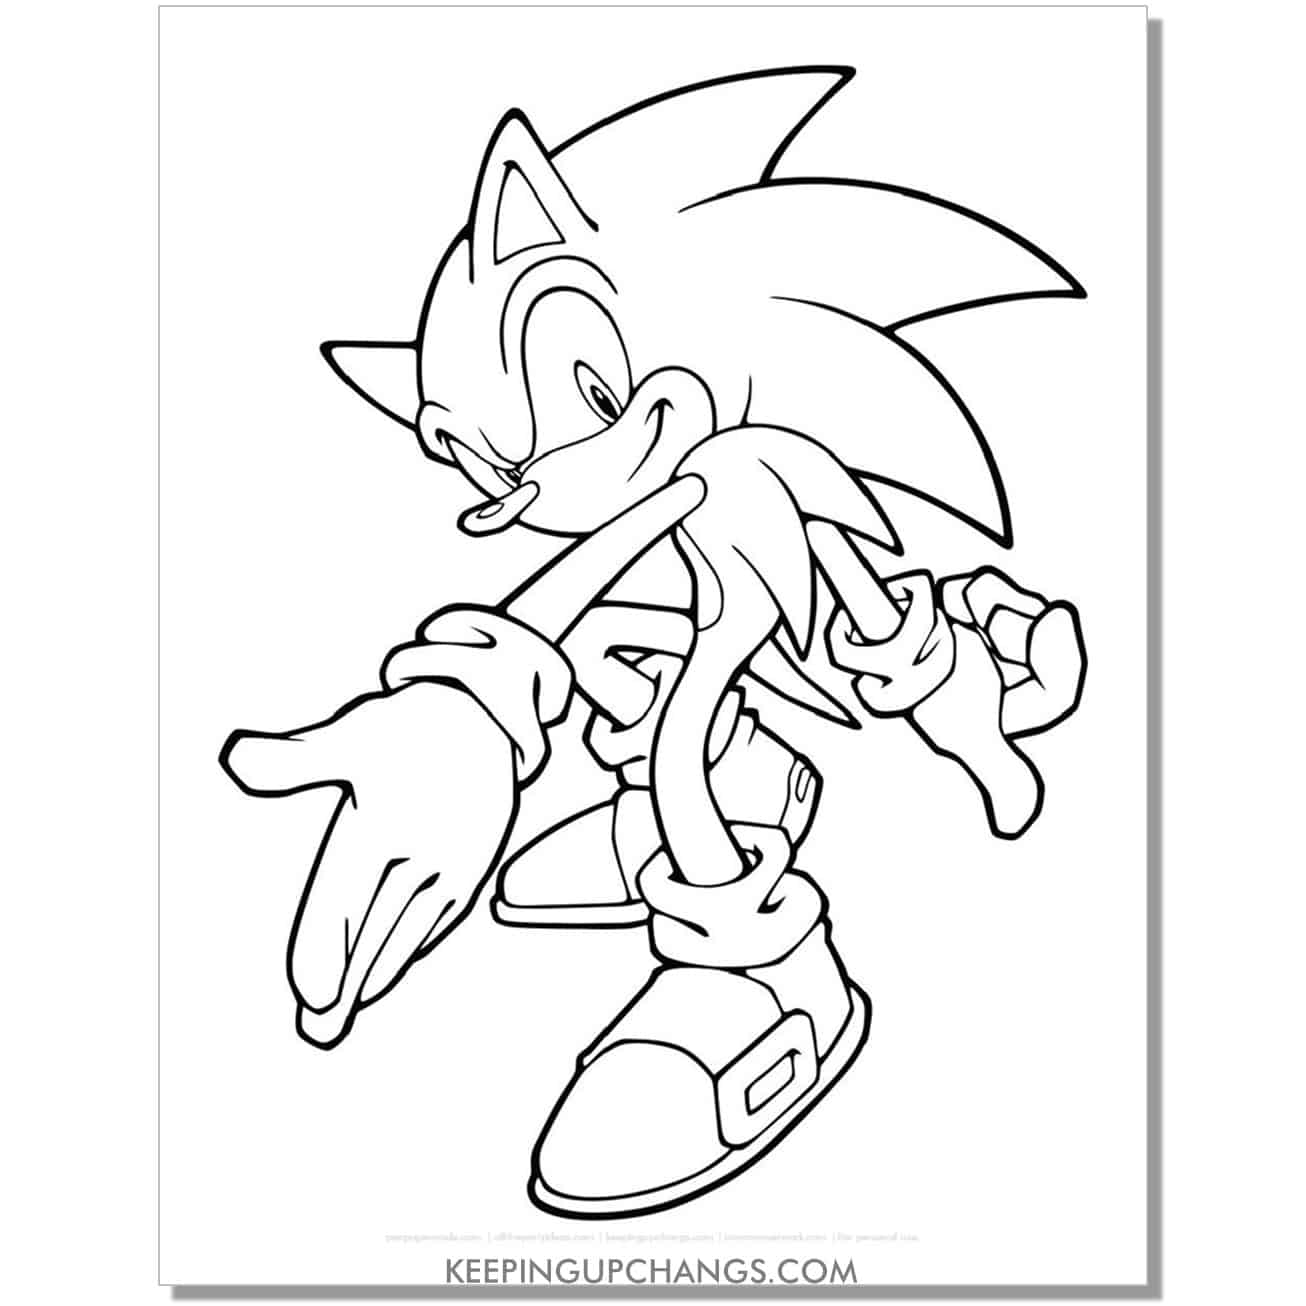 sonic with arms out at 45 degrees coloring page.